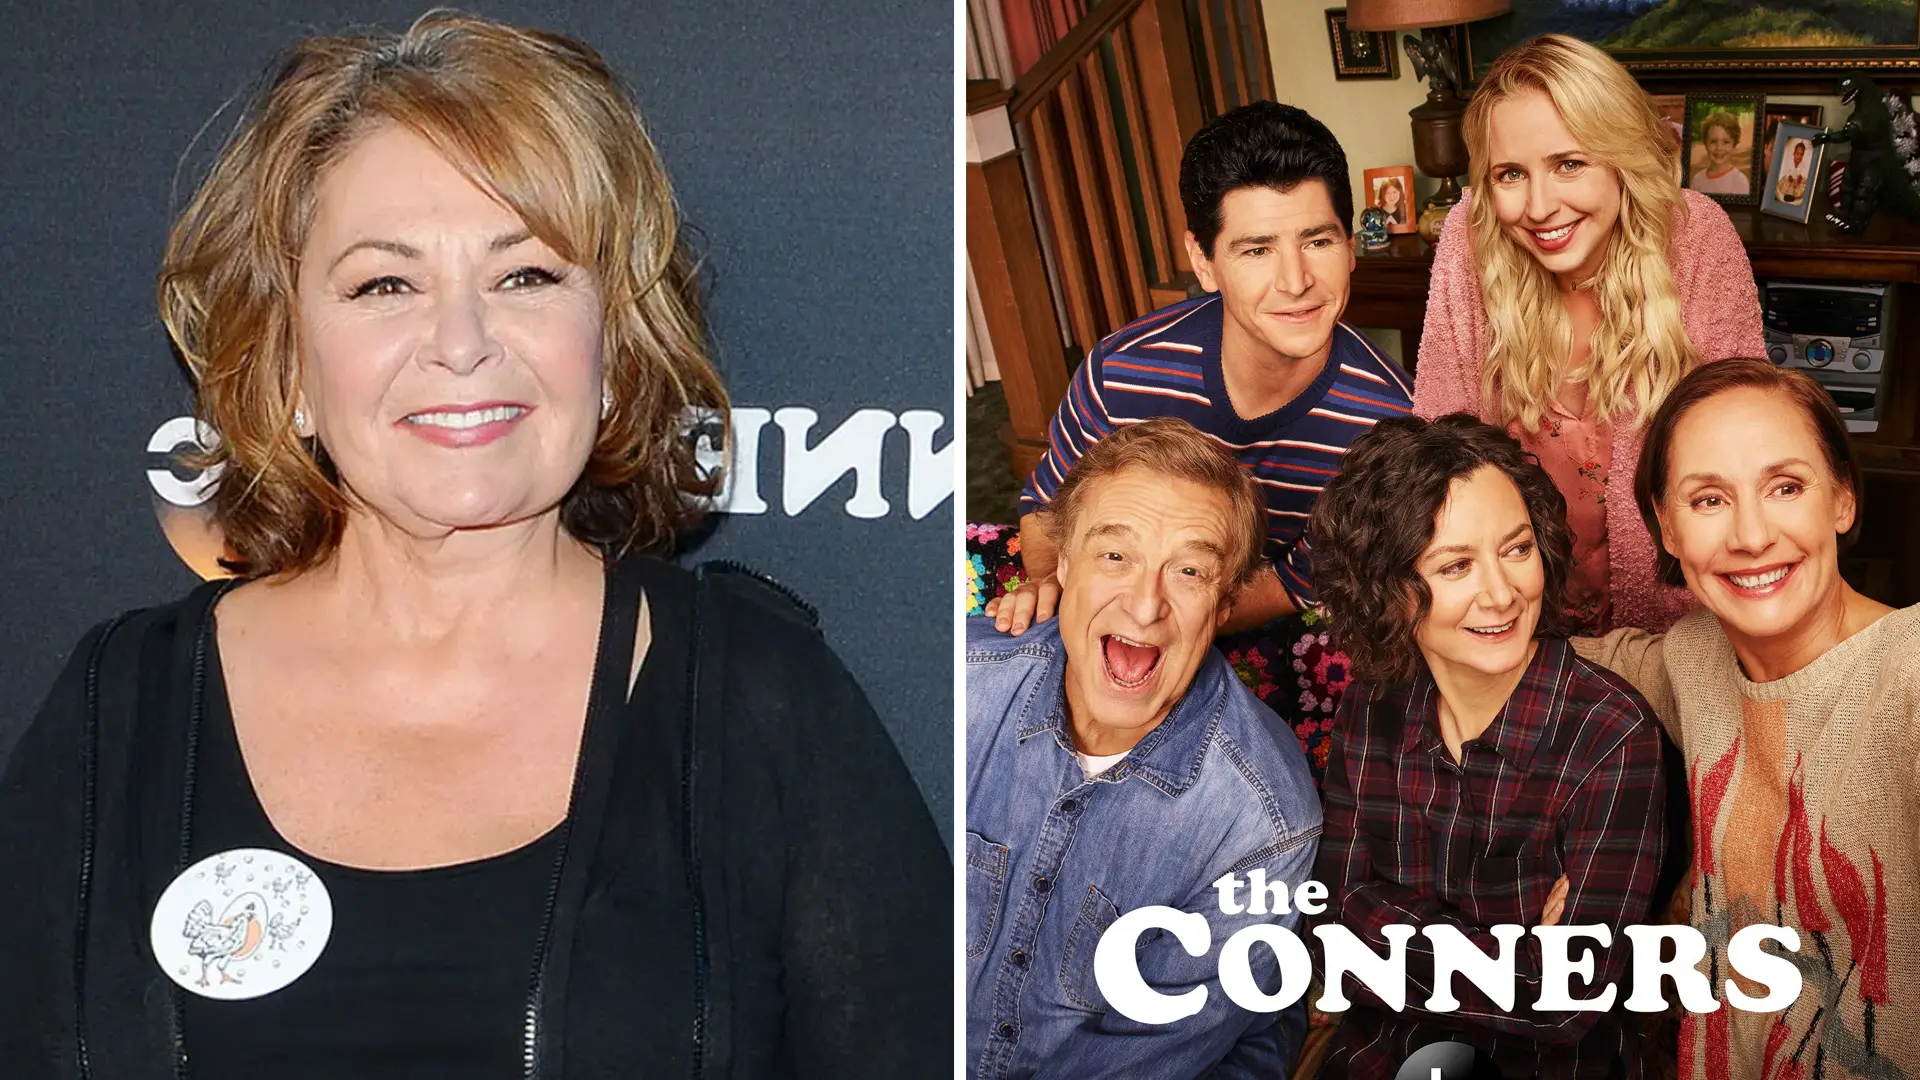 Roseanne The conners offer